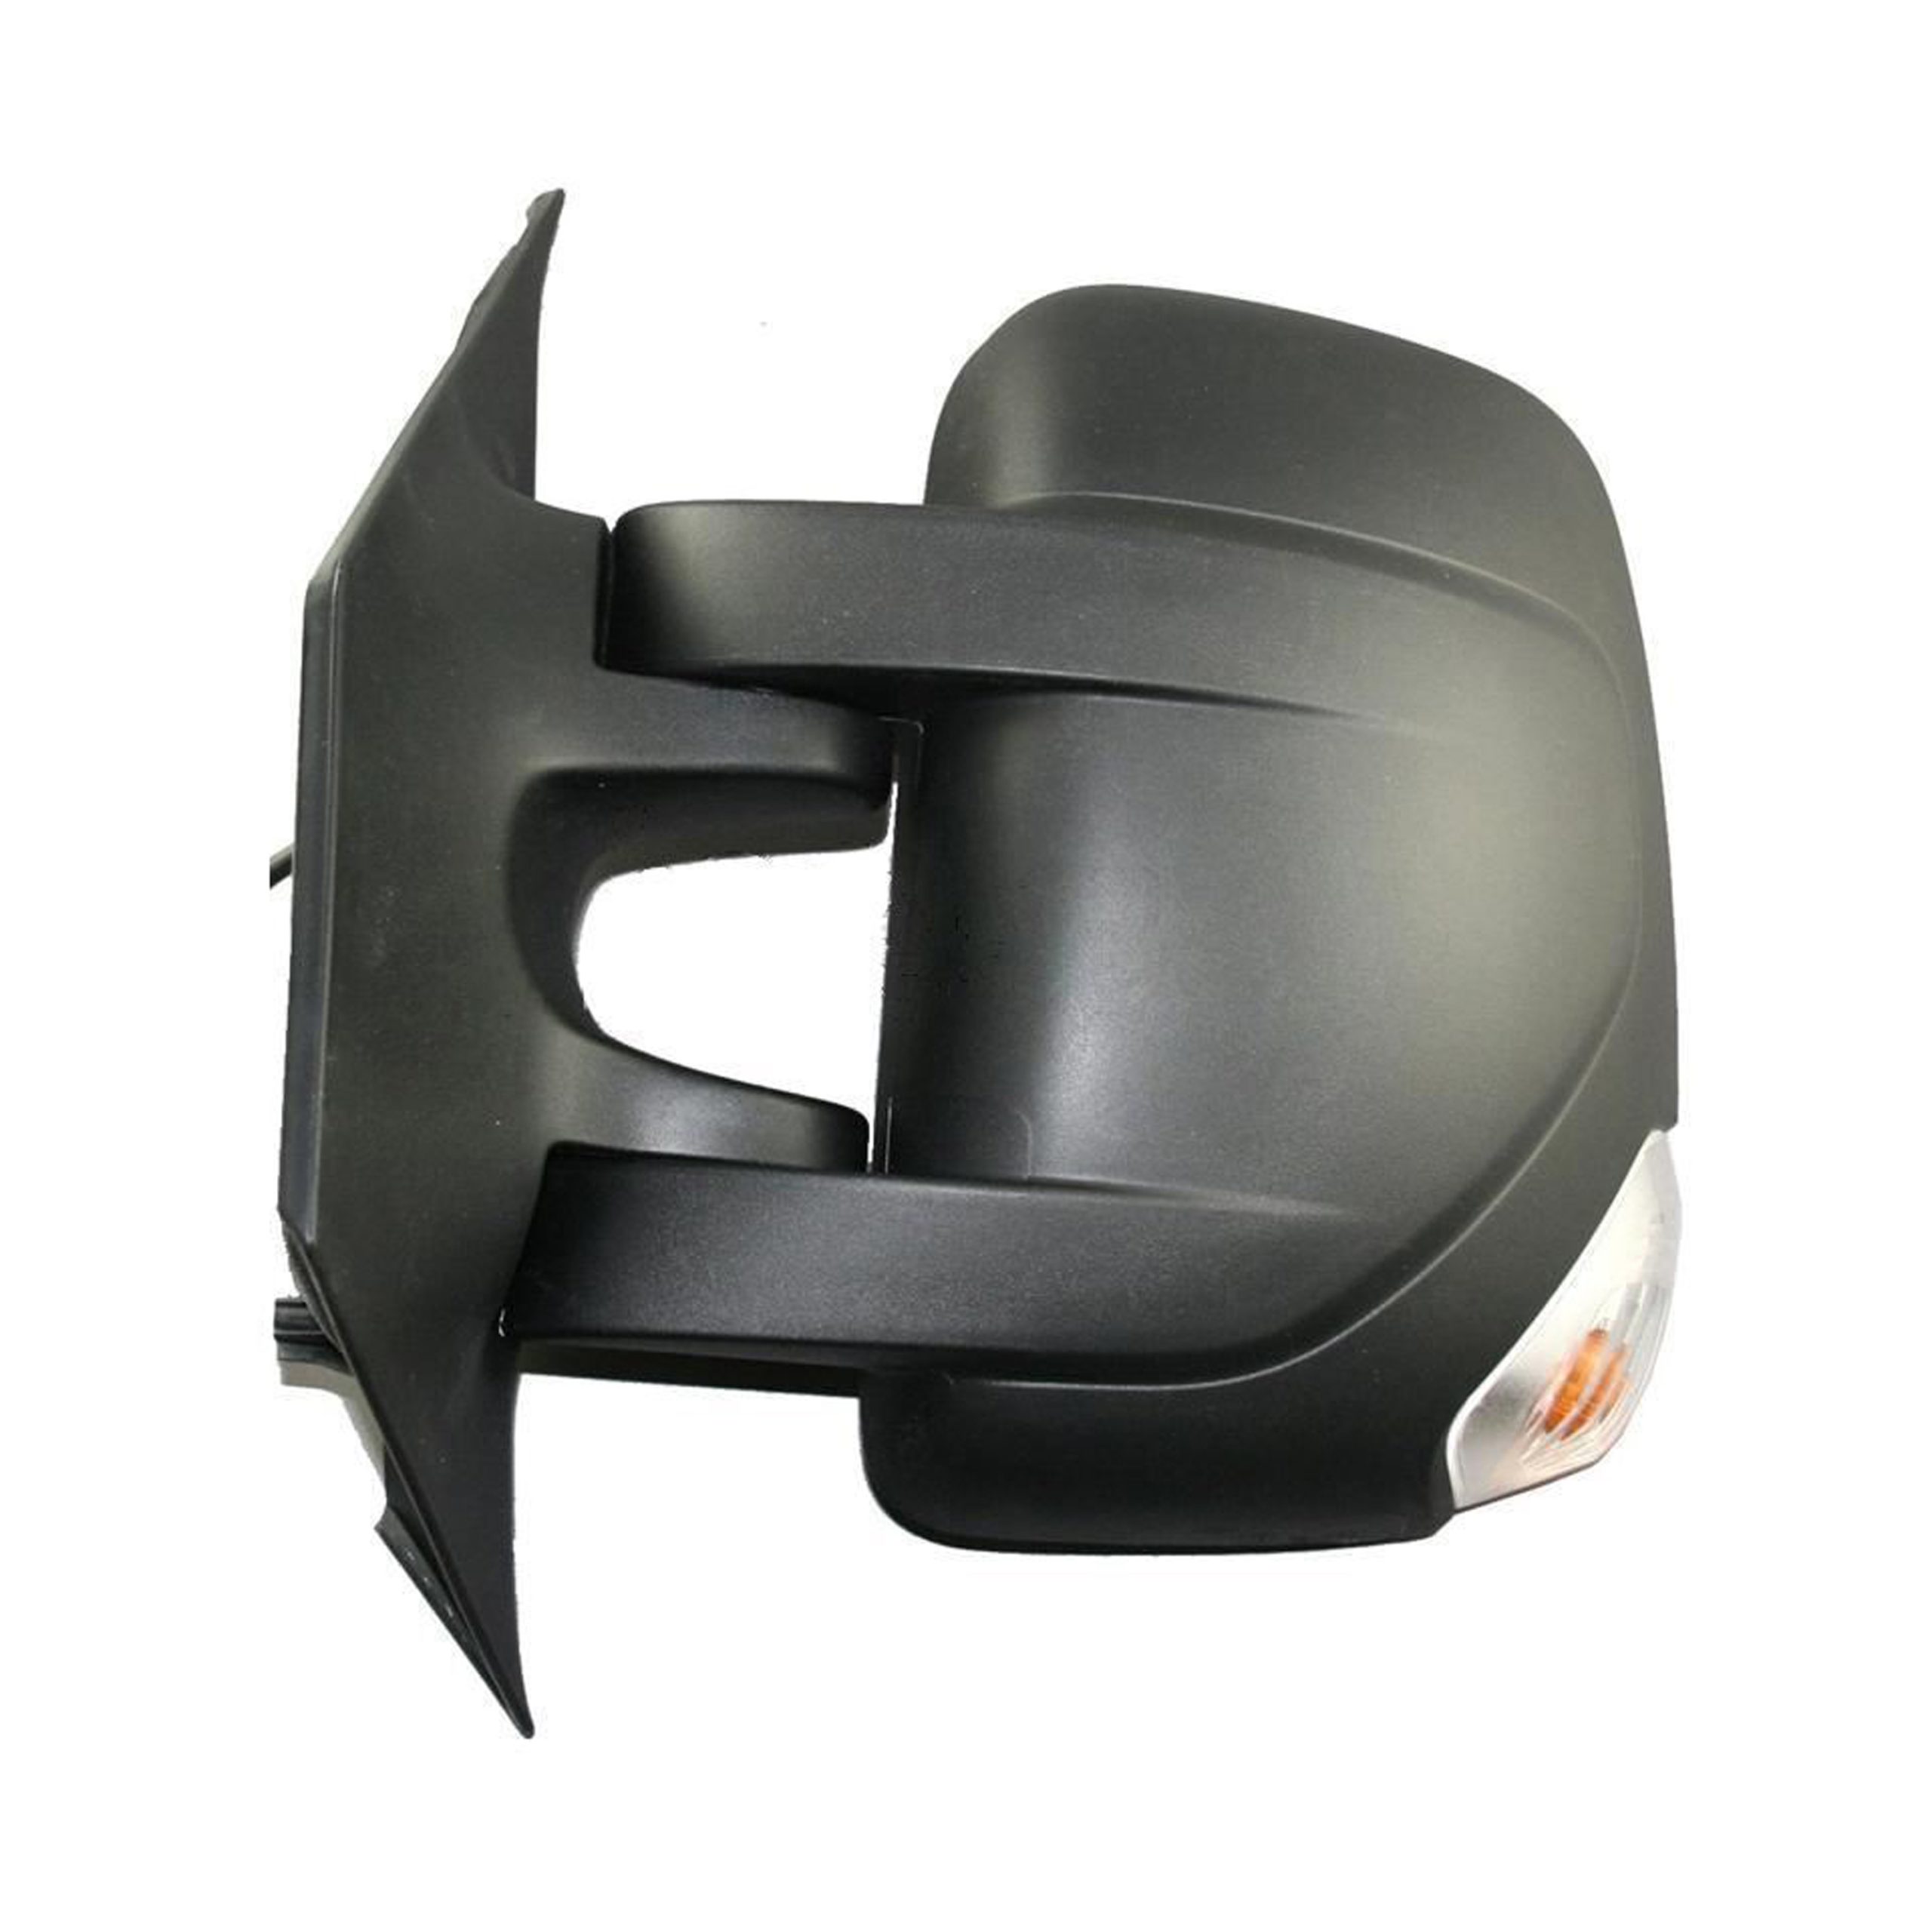 Nissan NV400 Complete Wing Mirror Unit LEFT HAND ( UK Passenger Side ) 2011 to 2019 – Manual Wing Mirror Unit ( SHORT Arm )